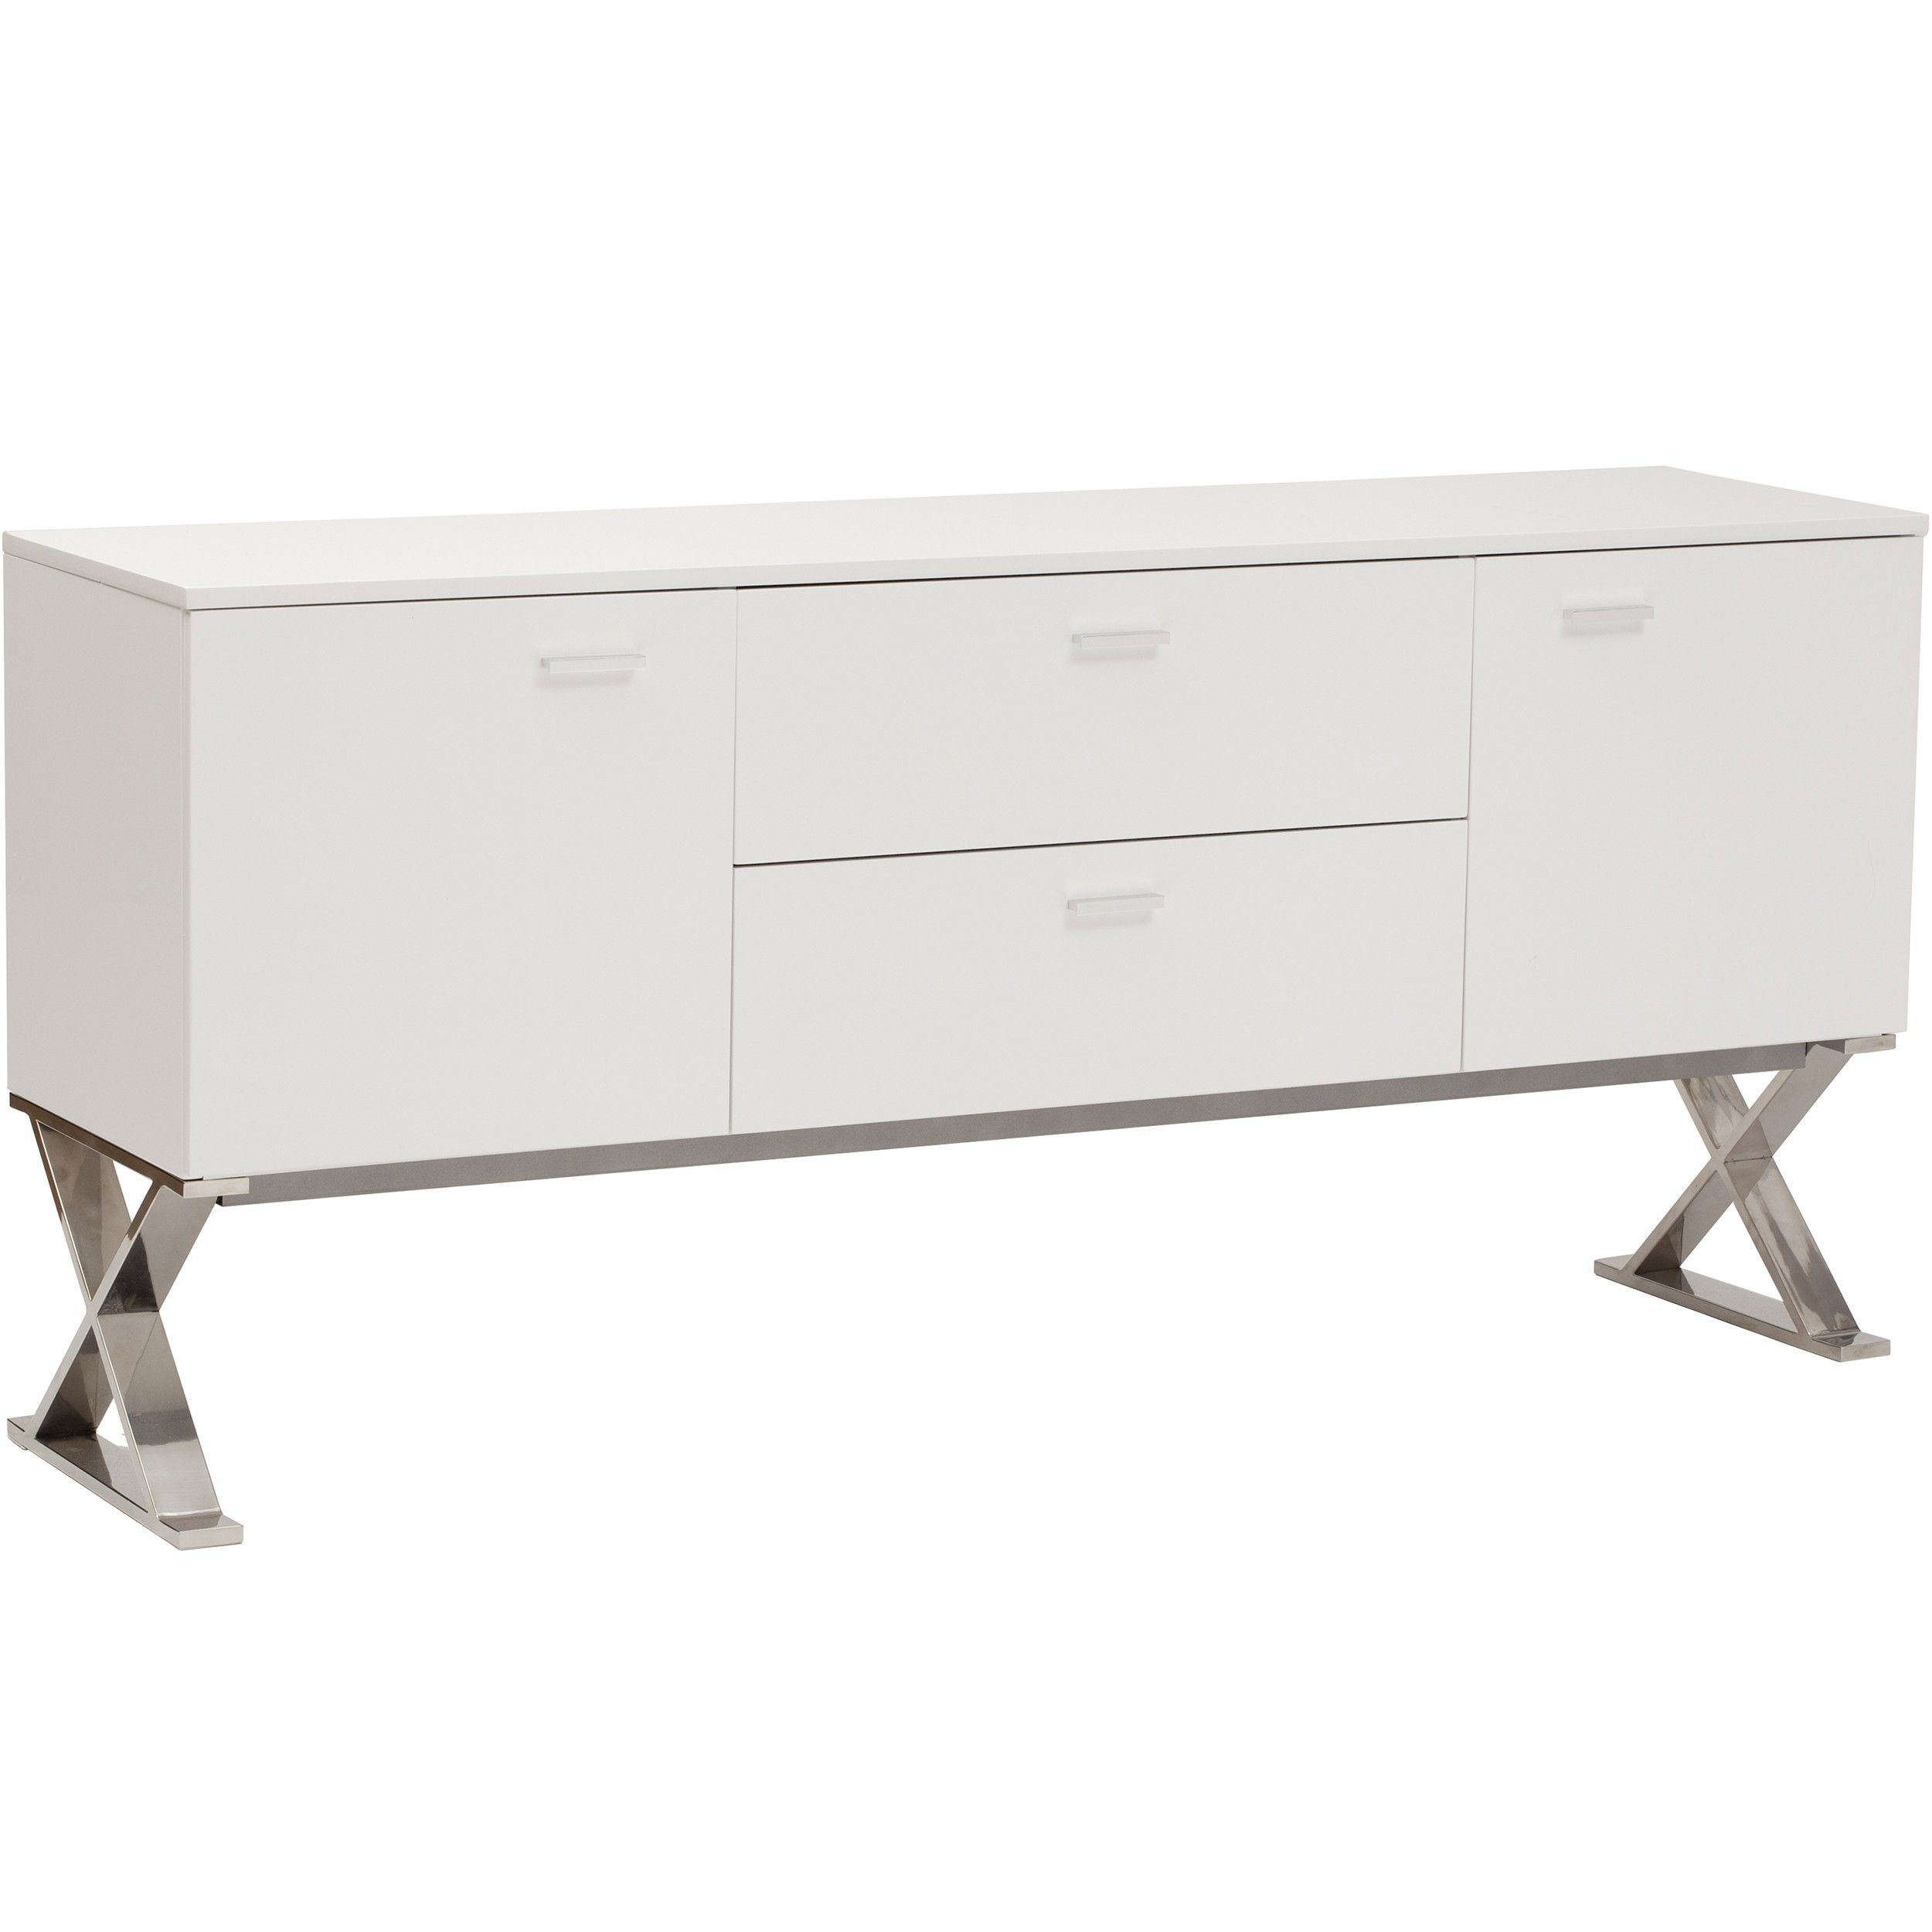 Alexa Buffet, White/polished Stainless Base | Dining For Emiliano Sideboards (View 8 of 30)